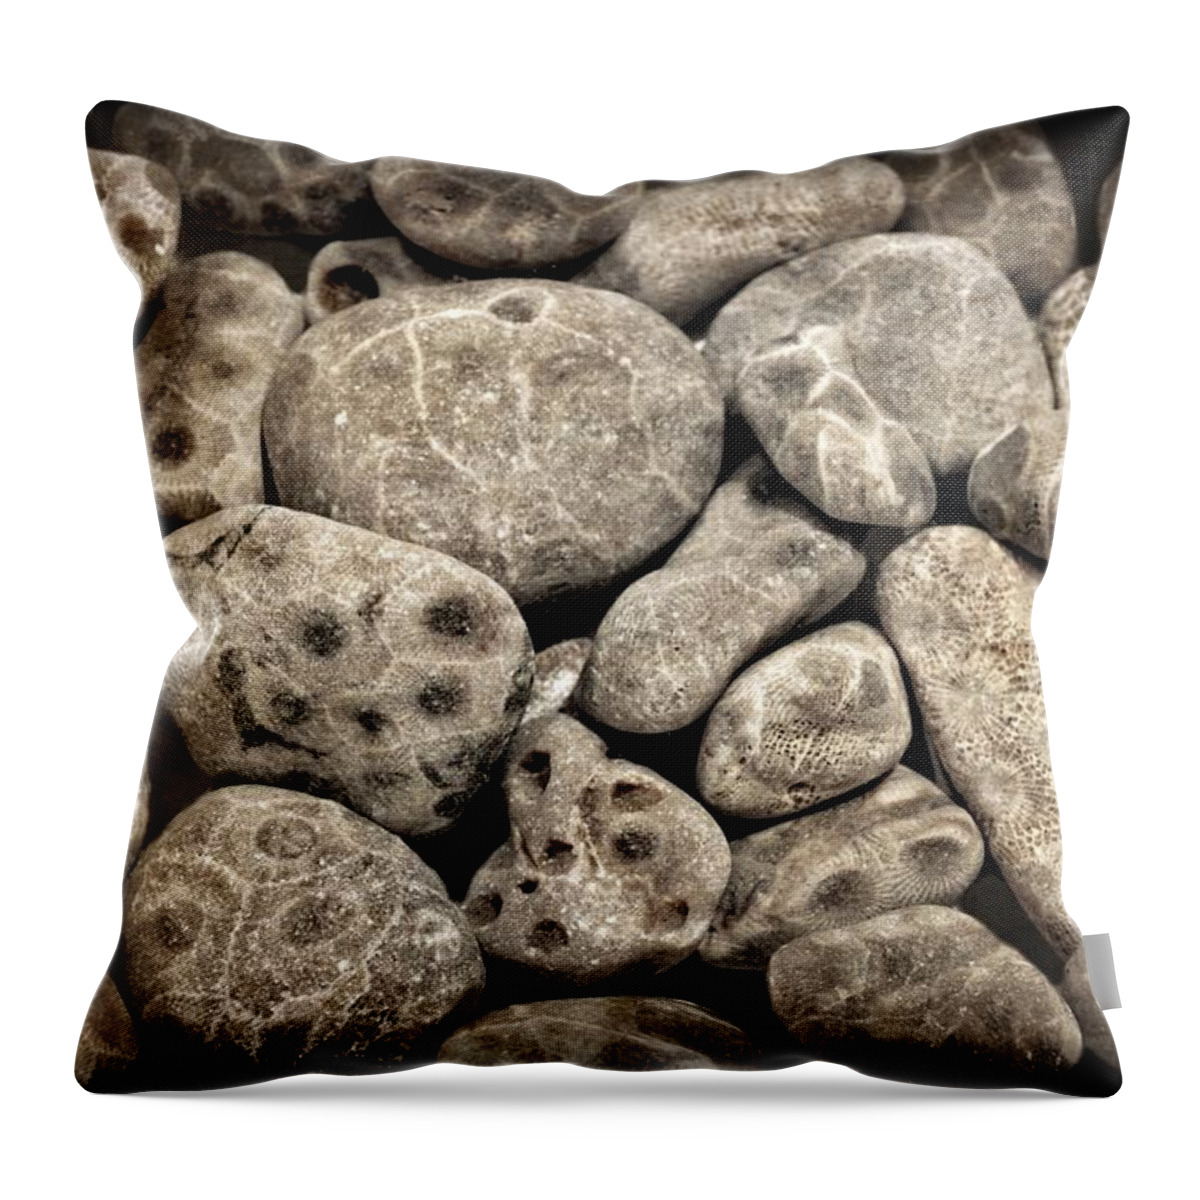 Stone Throw Pillow featuring the photograph Petoskey Stones Vl by Michelle Calkins